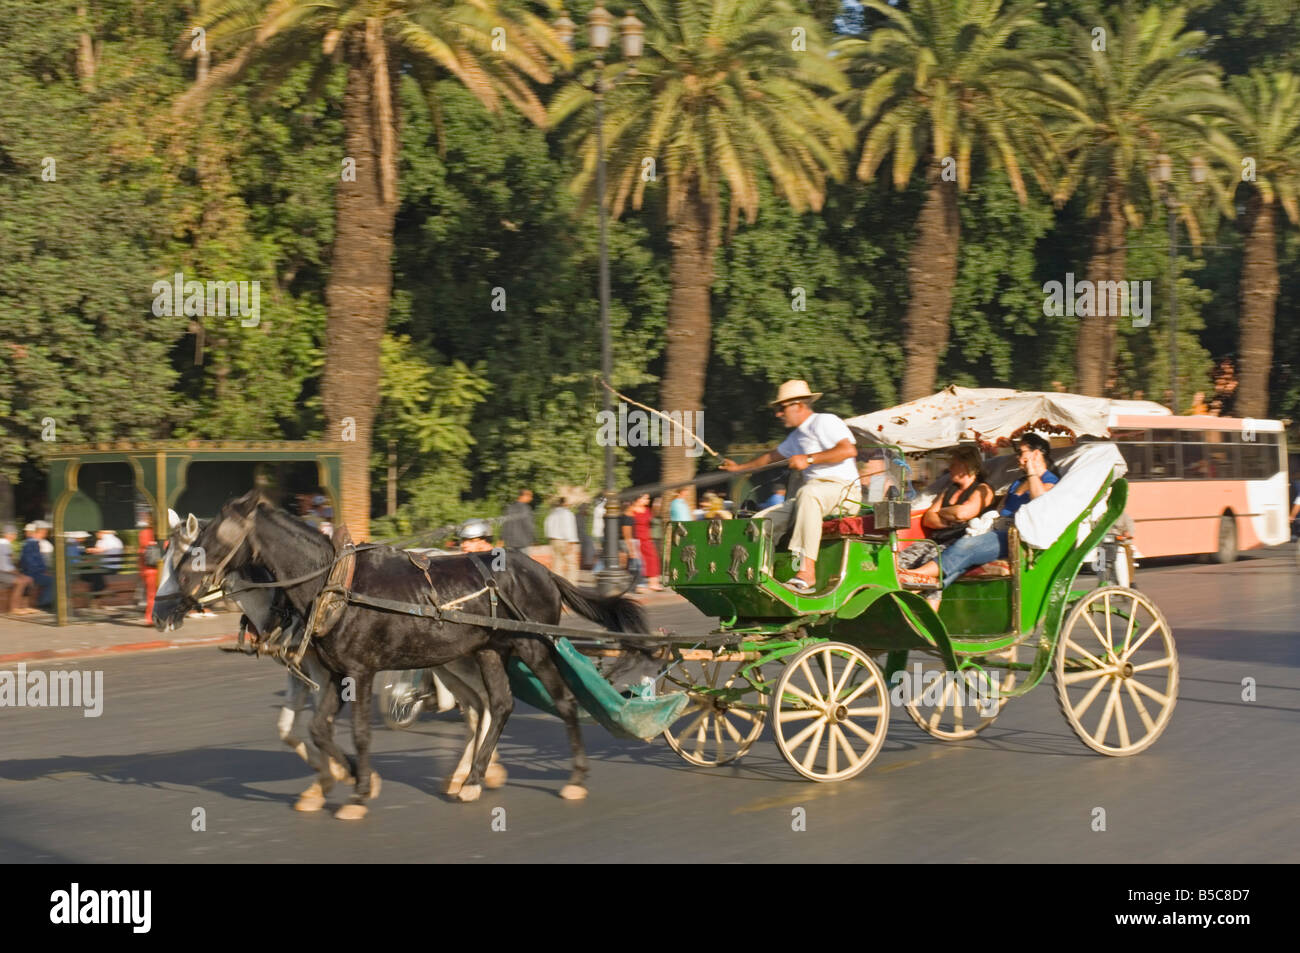 A tourist horse and carriage (Caleche) in Marrakesh - Slow shutter speed and panning for motion blur. Stock Photo